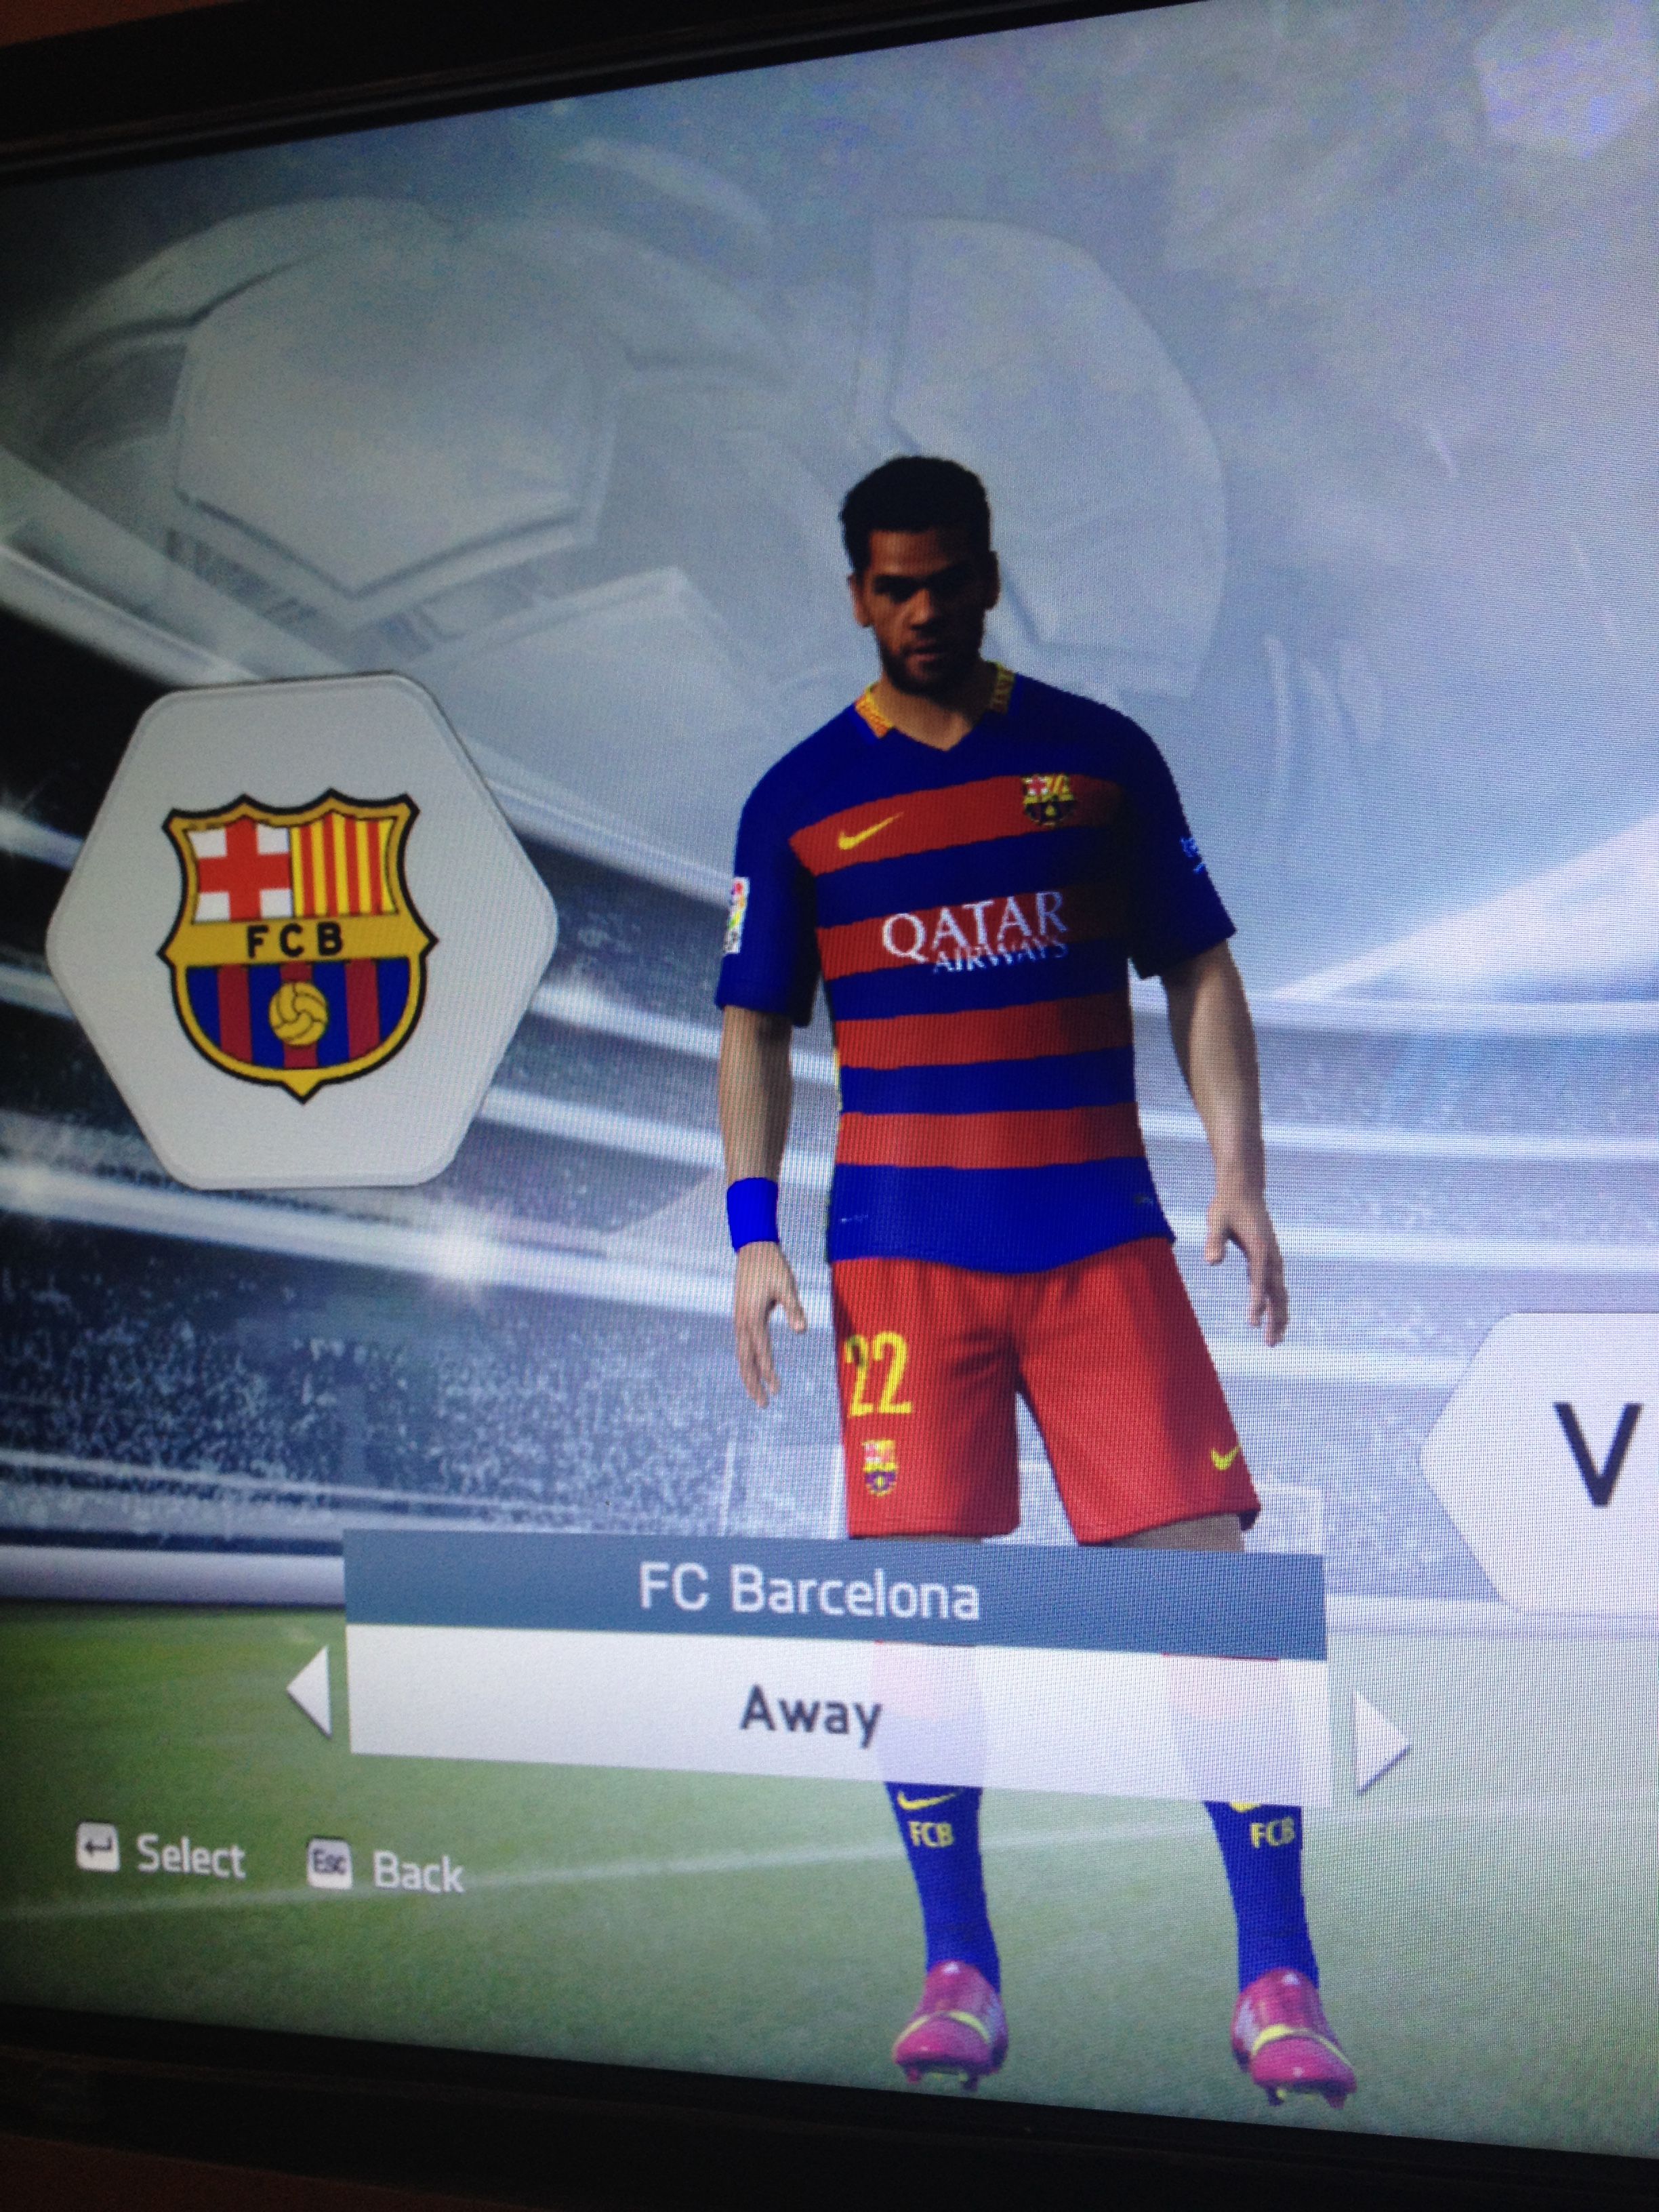 Play FIFA 14 as FC Barcelona on mobile telephones